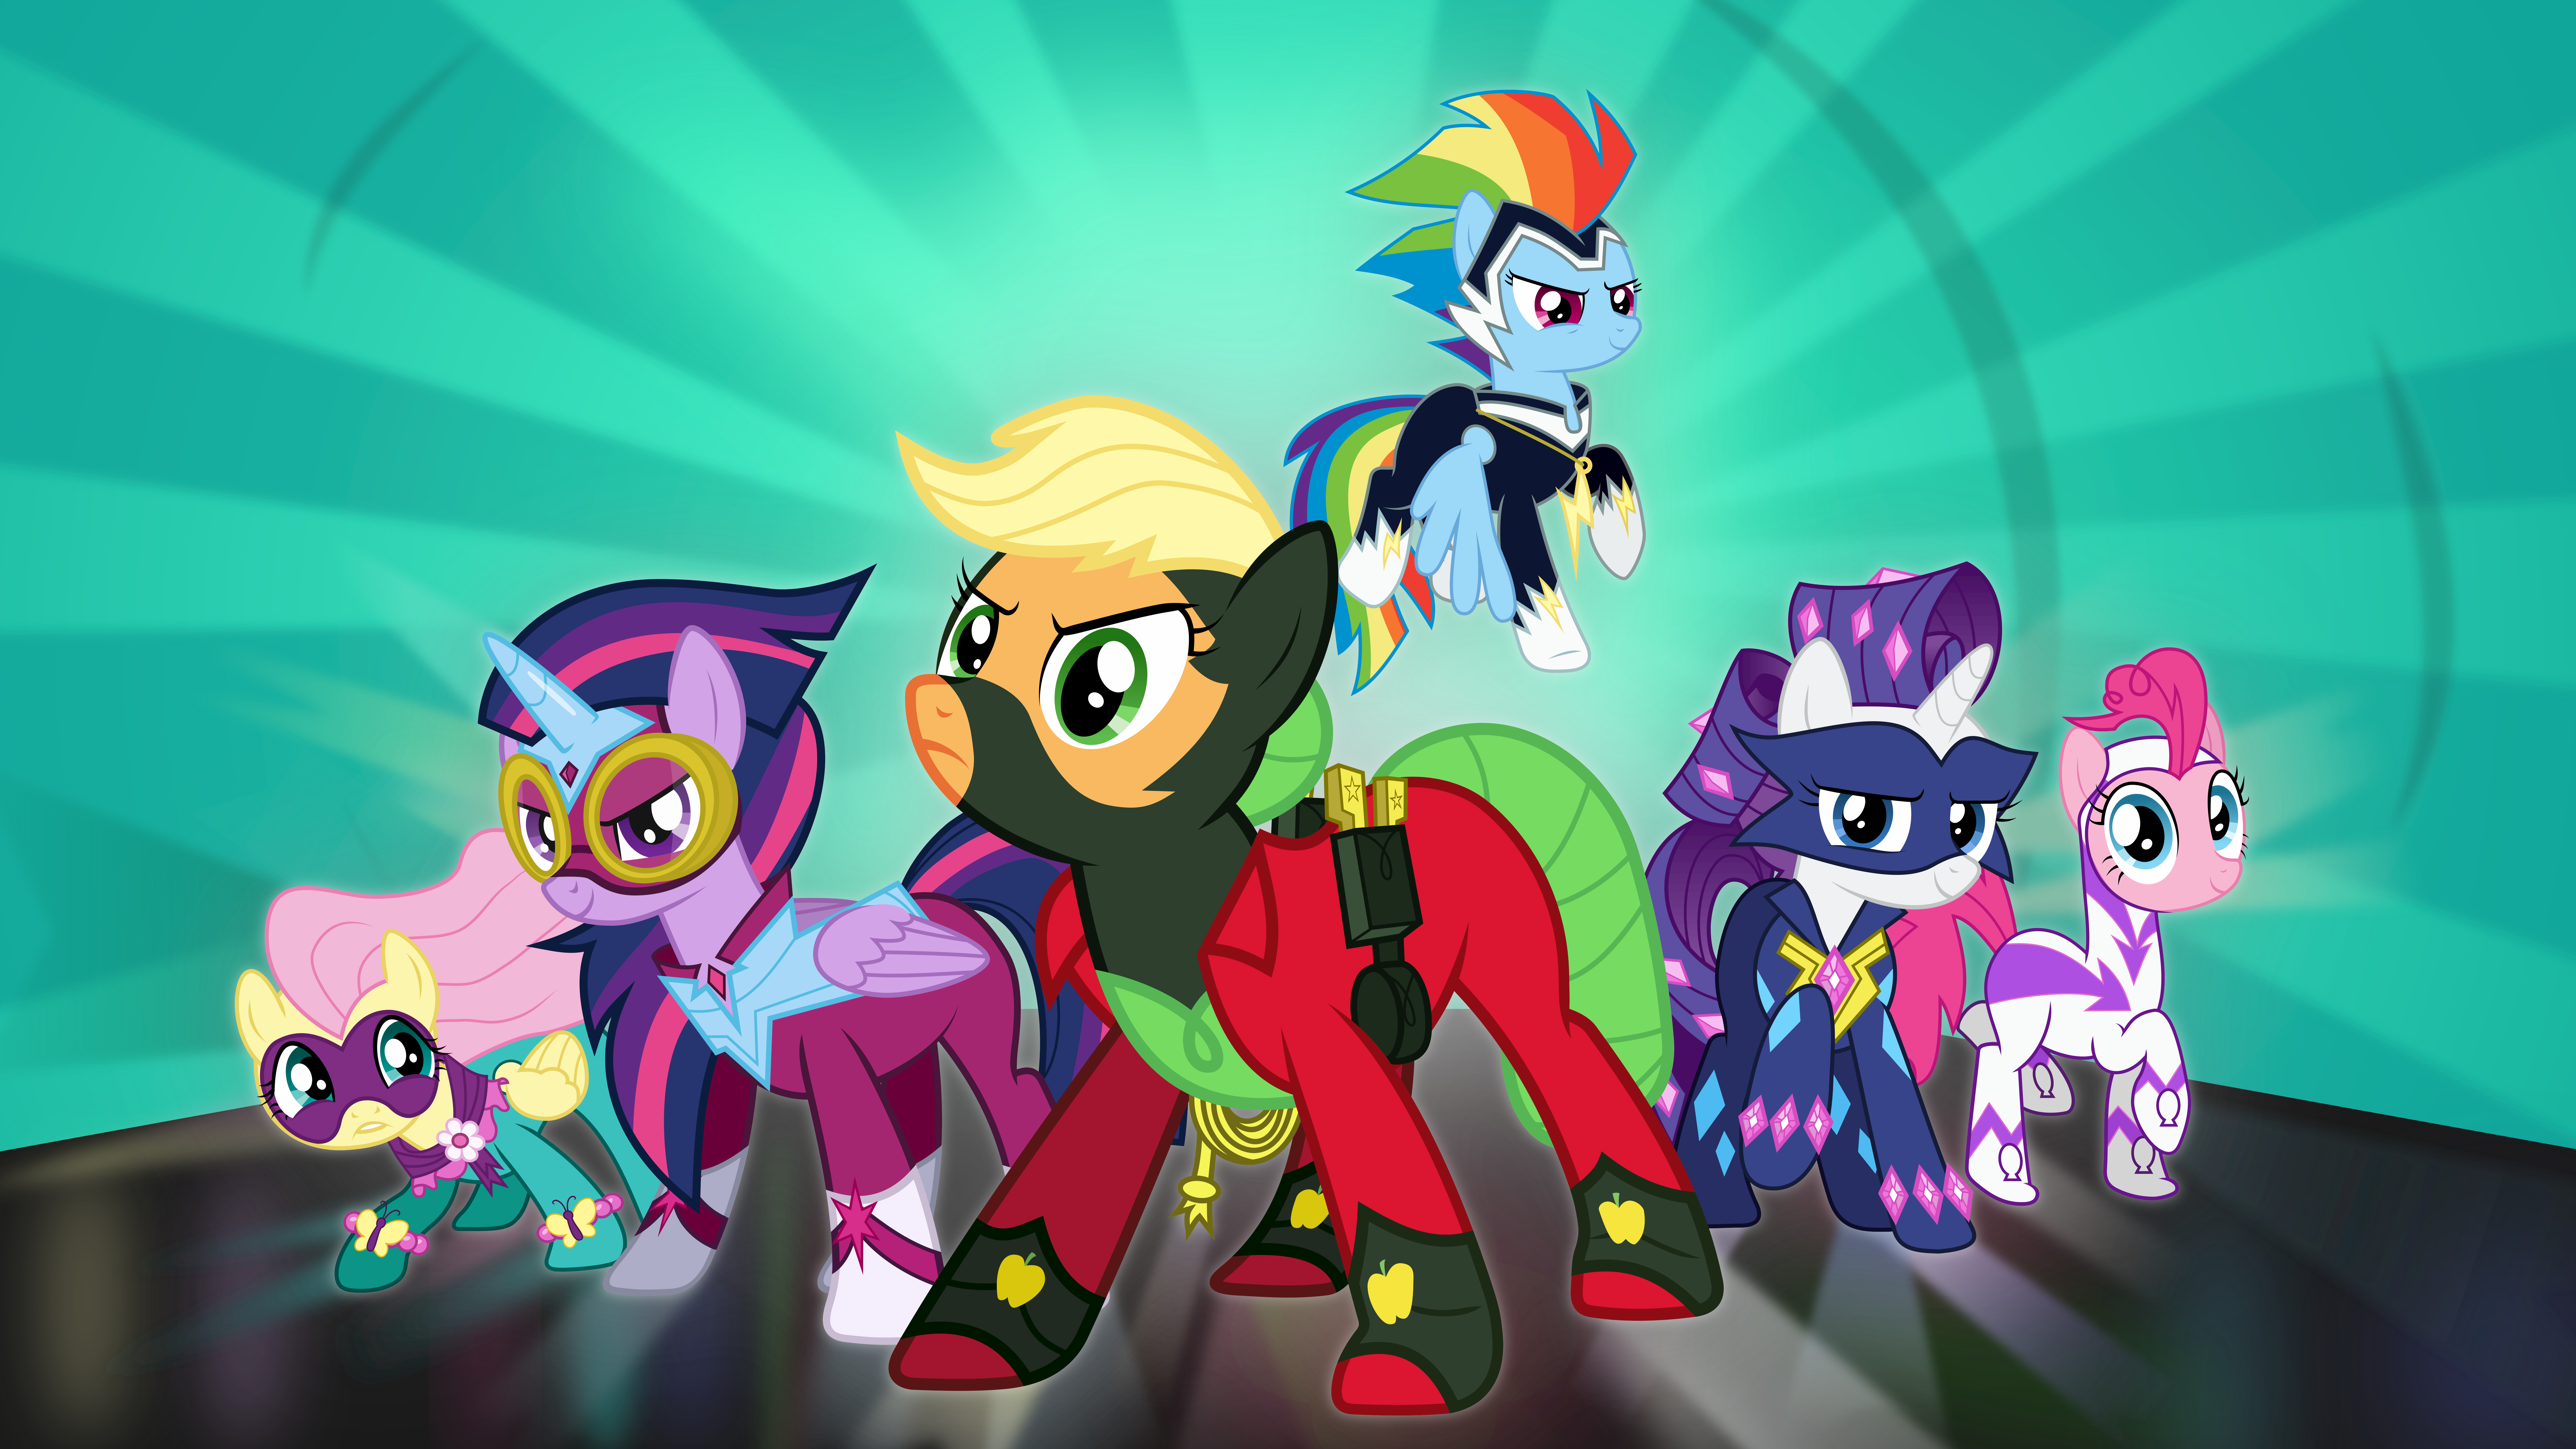 The Power Ponies by liamwhite1